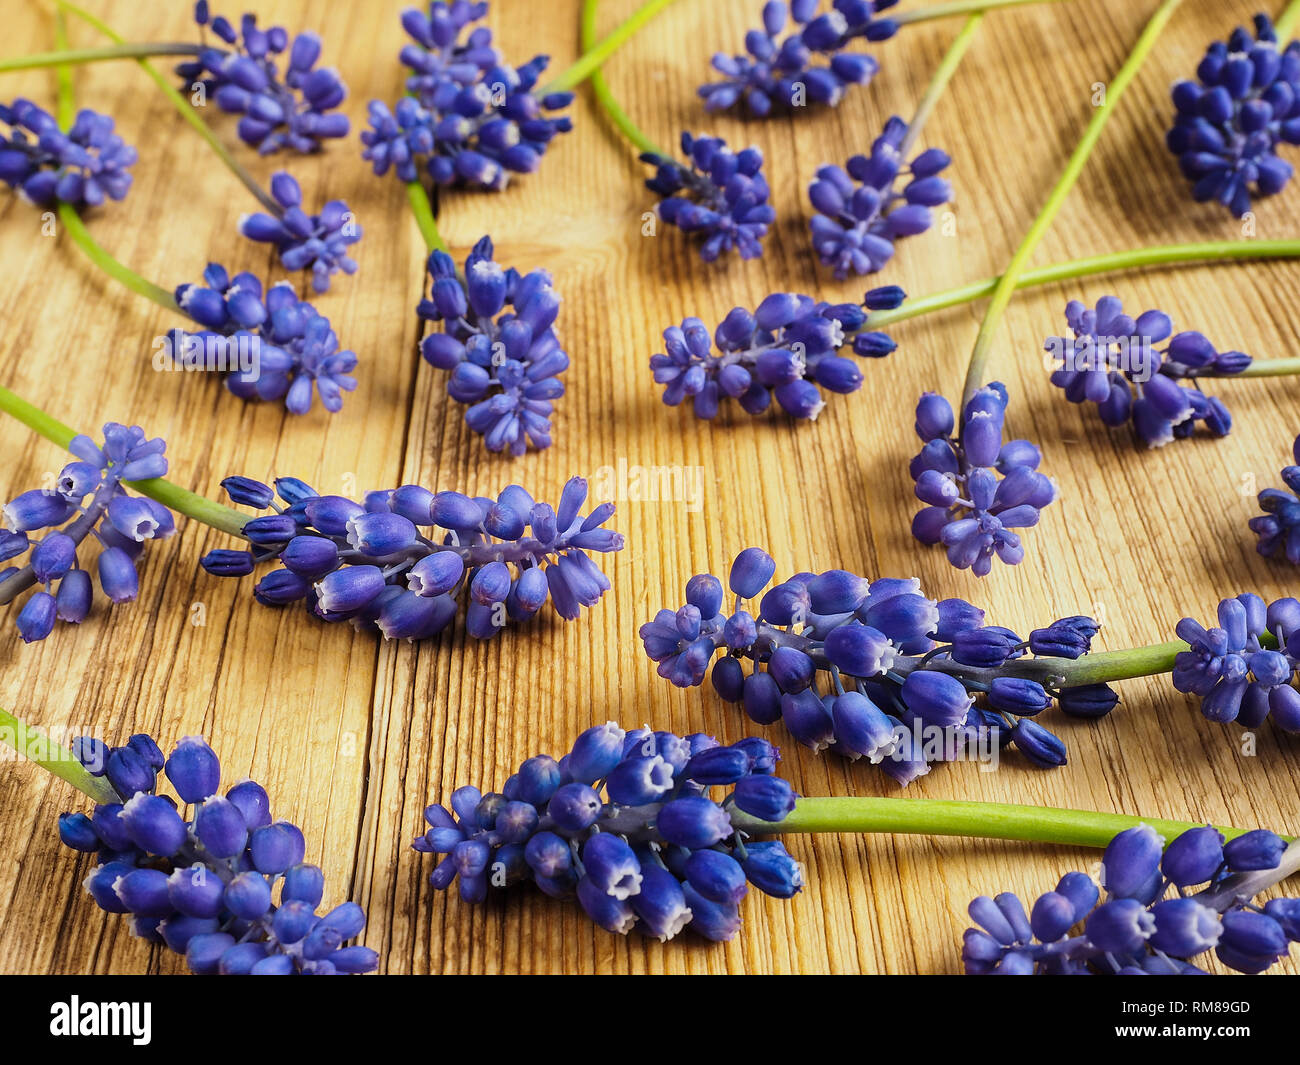 Muscari flowers on the wooden background Stock Photo